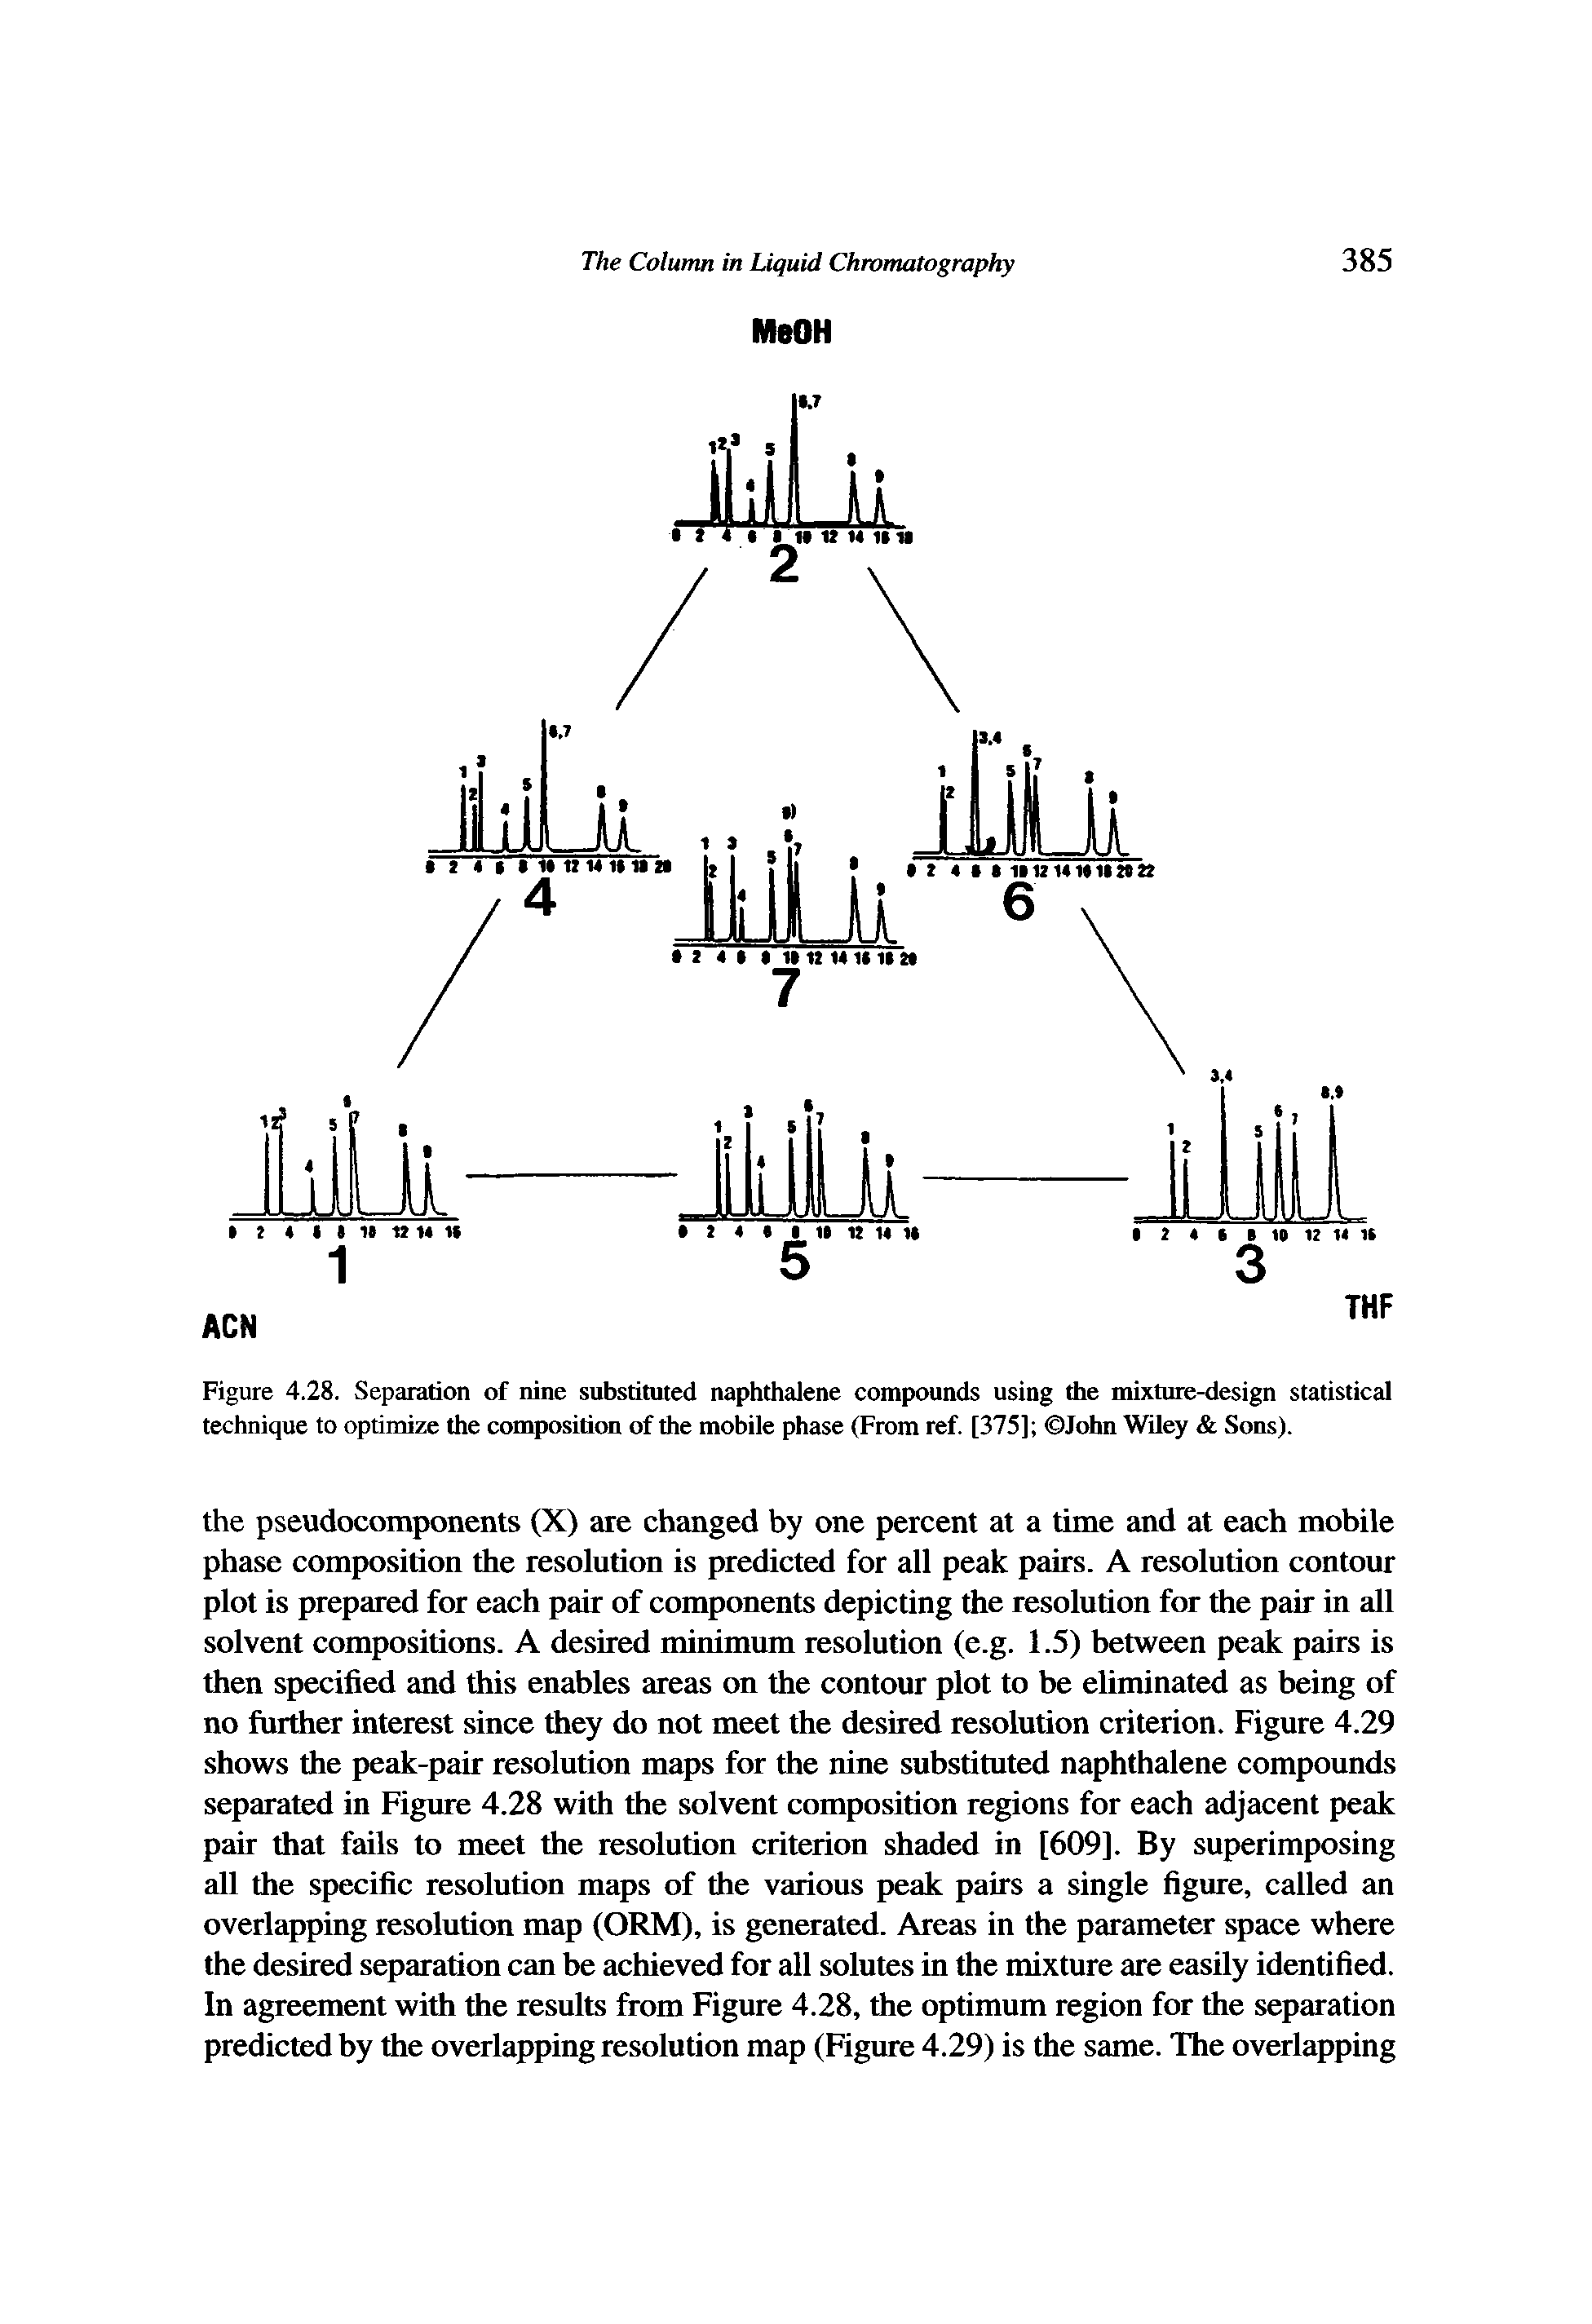 Figure 4.28. Separation of nine substituted naphthalene compounds using the mixture-design statistical technique to optimize the composition of the mobile phase (From ref. [375] John Wiley Sons).